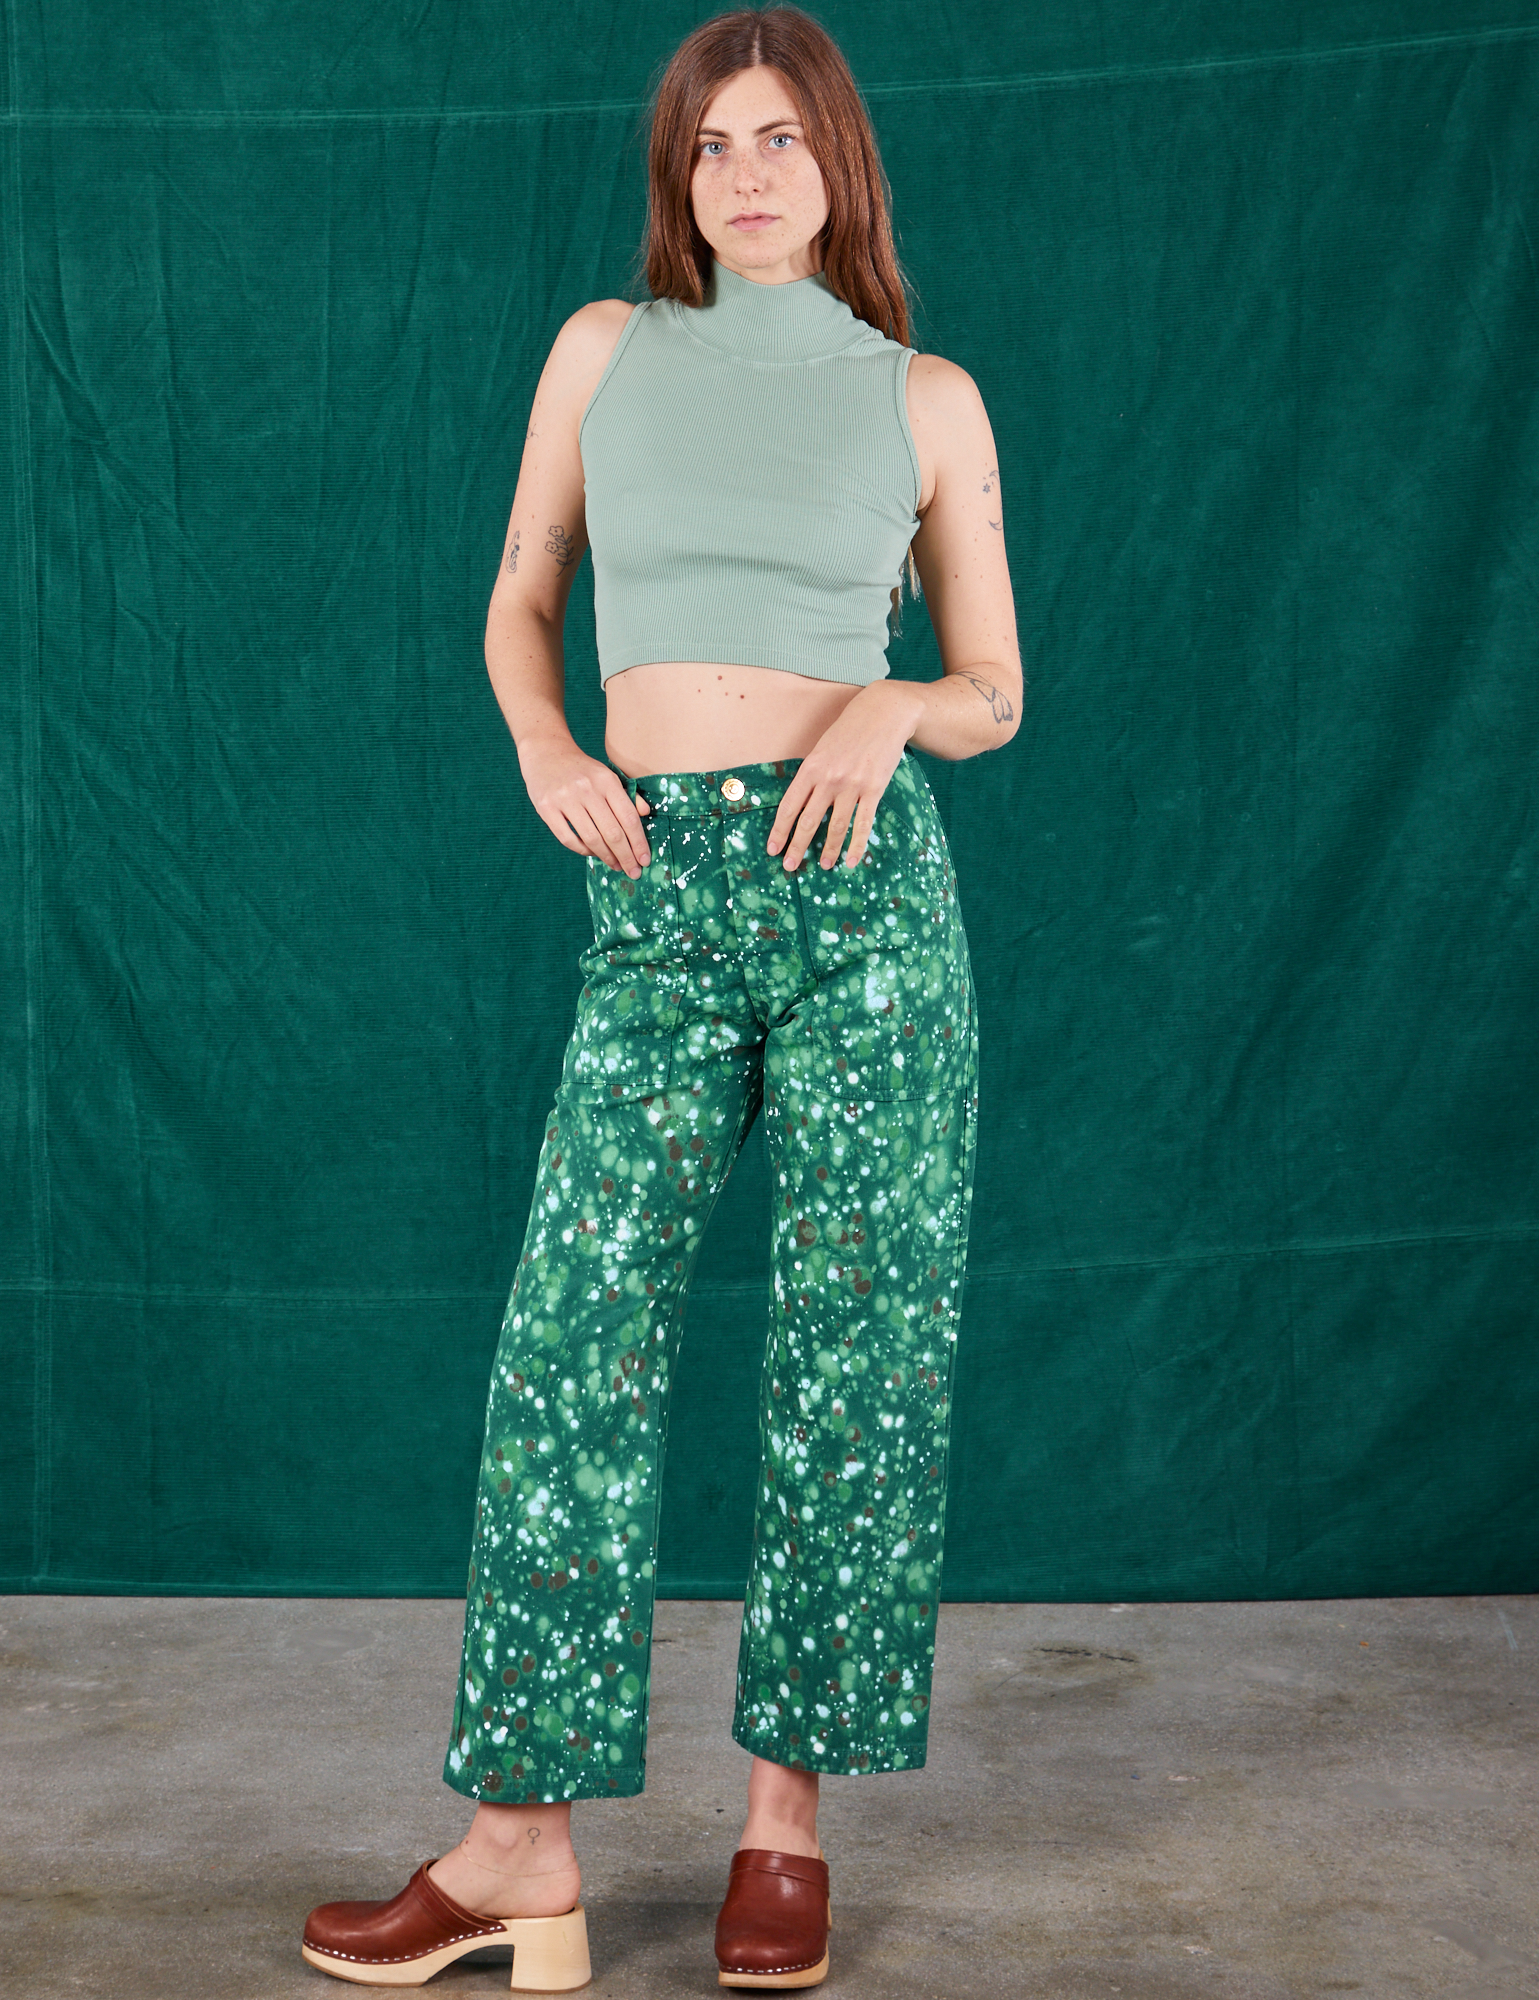 Scarlett is 5'9" and wearing XS Marble Splatter Work Pants in Hunter Green paired with sage green Sleeveless Turtleneck